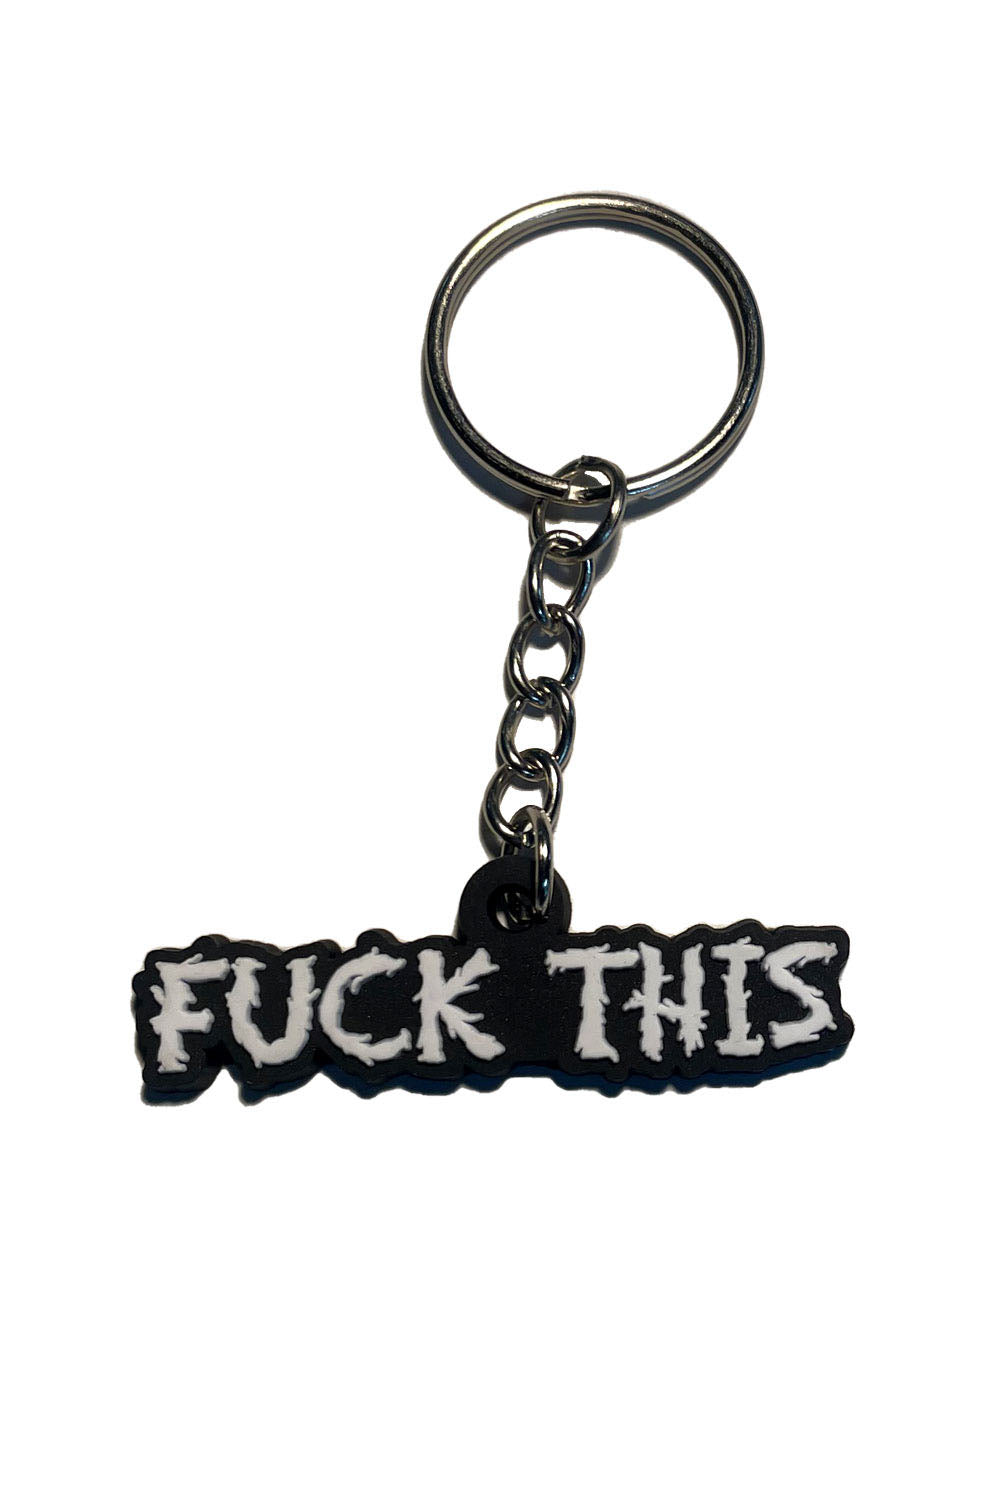 f*ck this keychain offensive funny